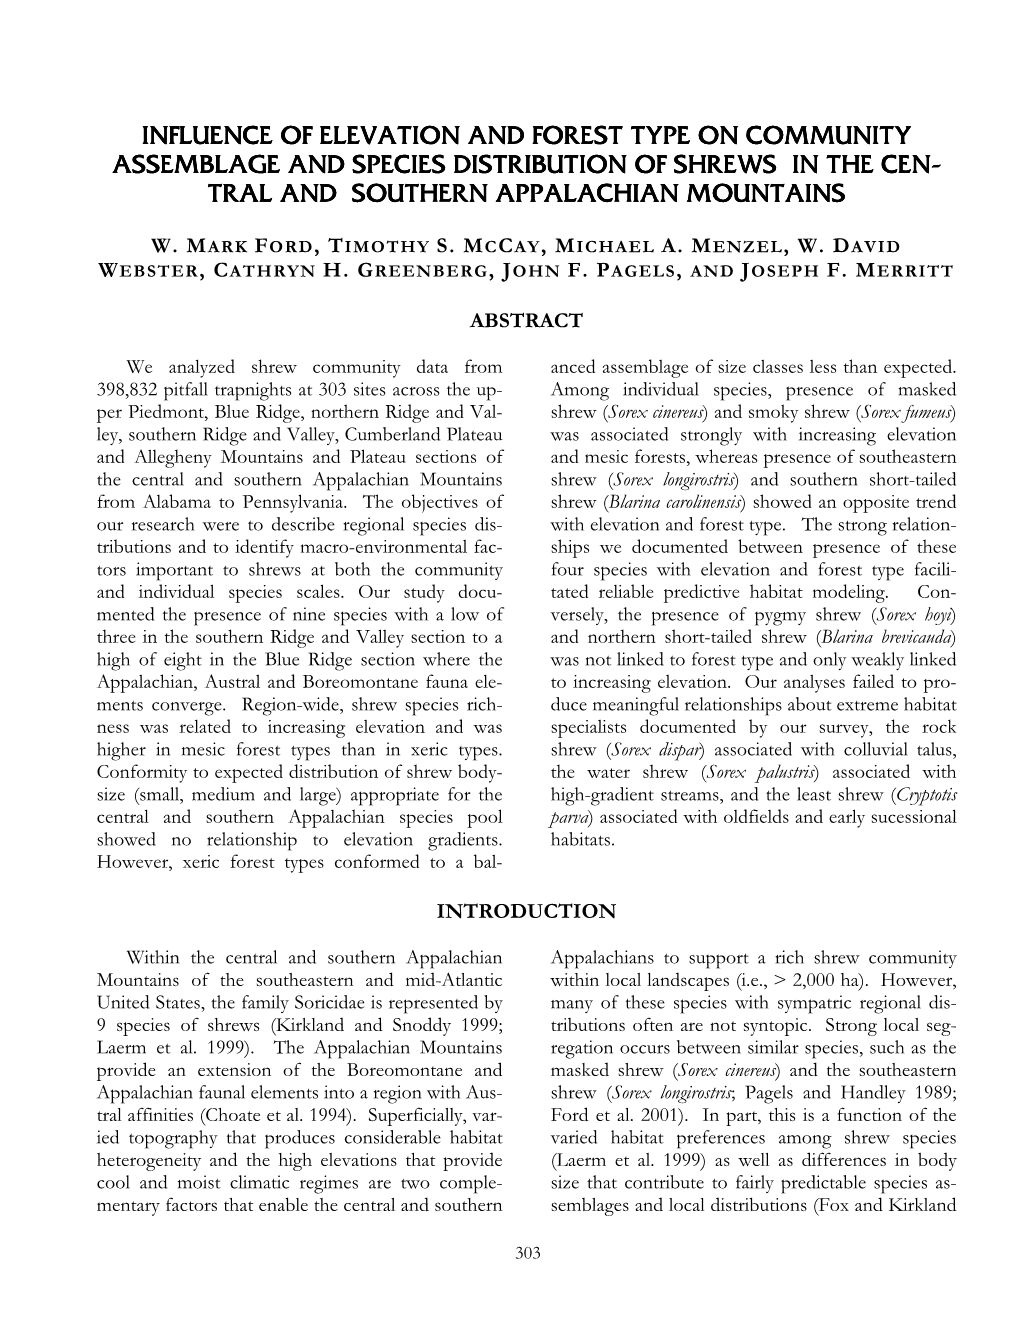 Influence of Elevation and Forest Type on Community Assemblage and Species Distribution of Shrews in Thethe Cecen-N- Tral and Southern Appalachian Mountains